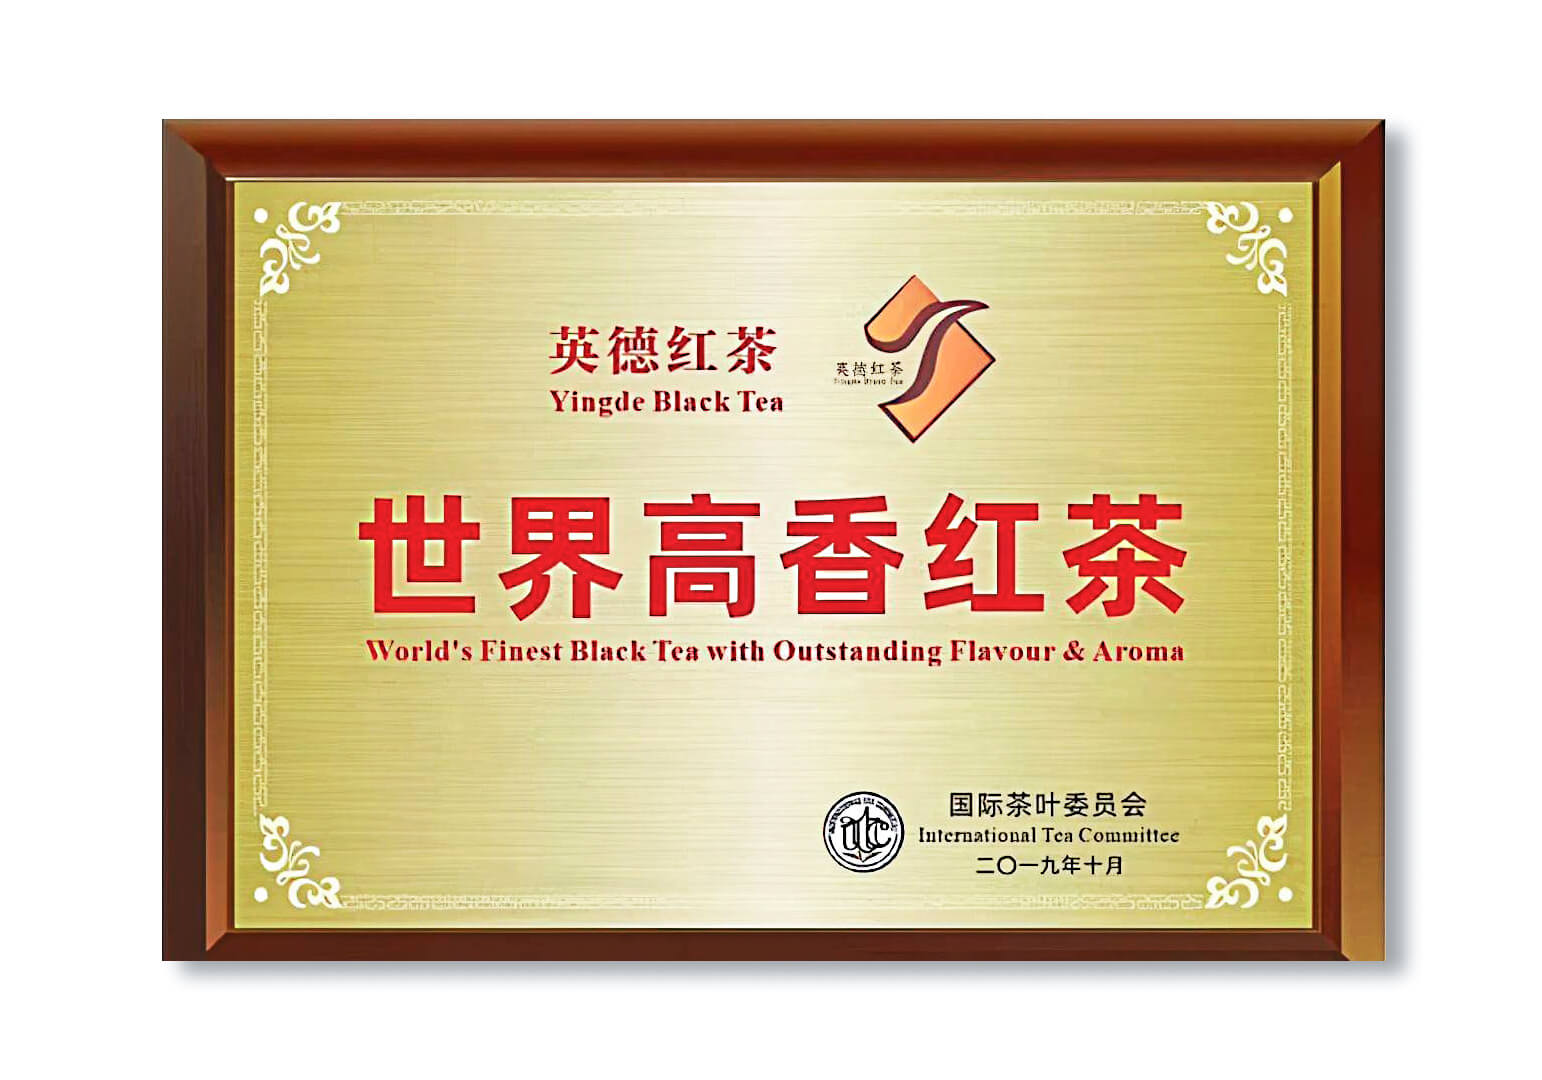 China-High-aroma-Black-Tea-Which-Is-Also-Renowned-Worldwide